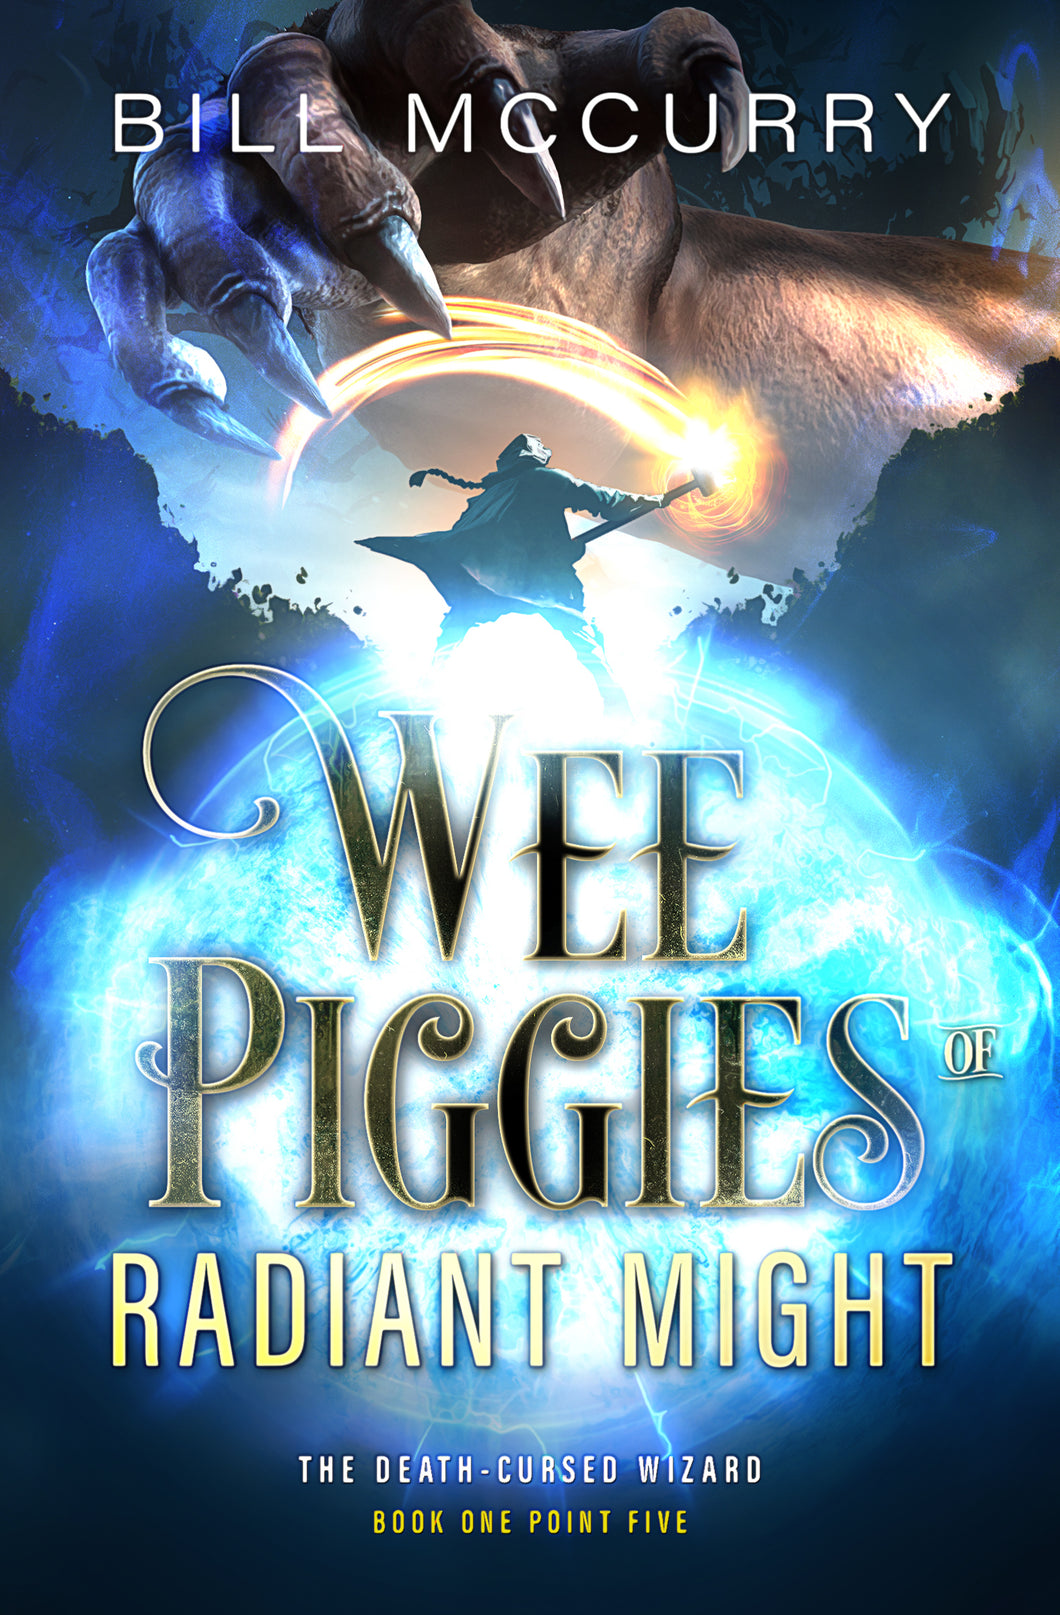 Wee Piggies of Radiant Might (Kindle and ePub)